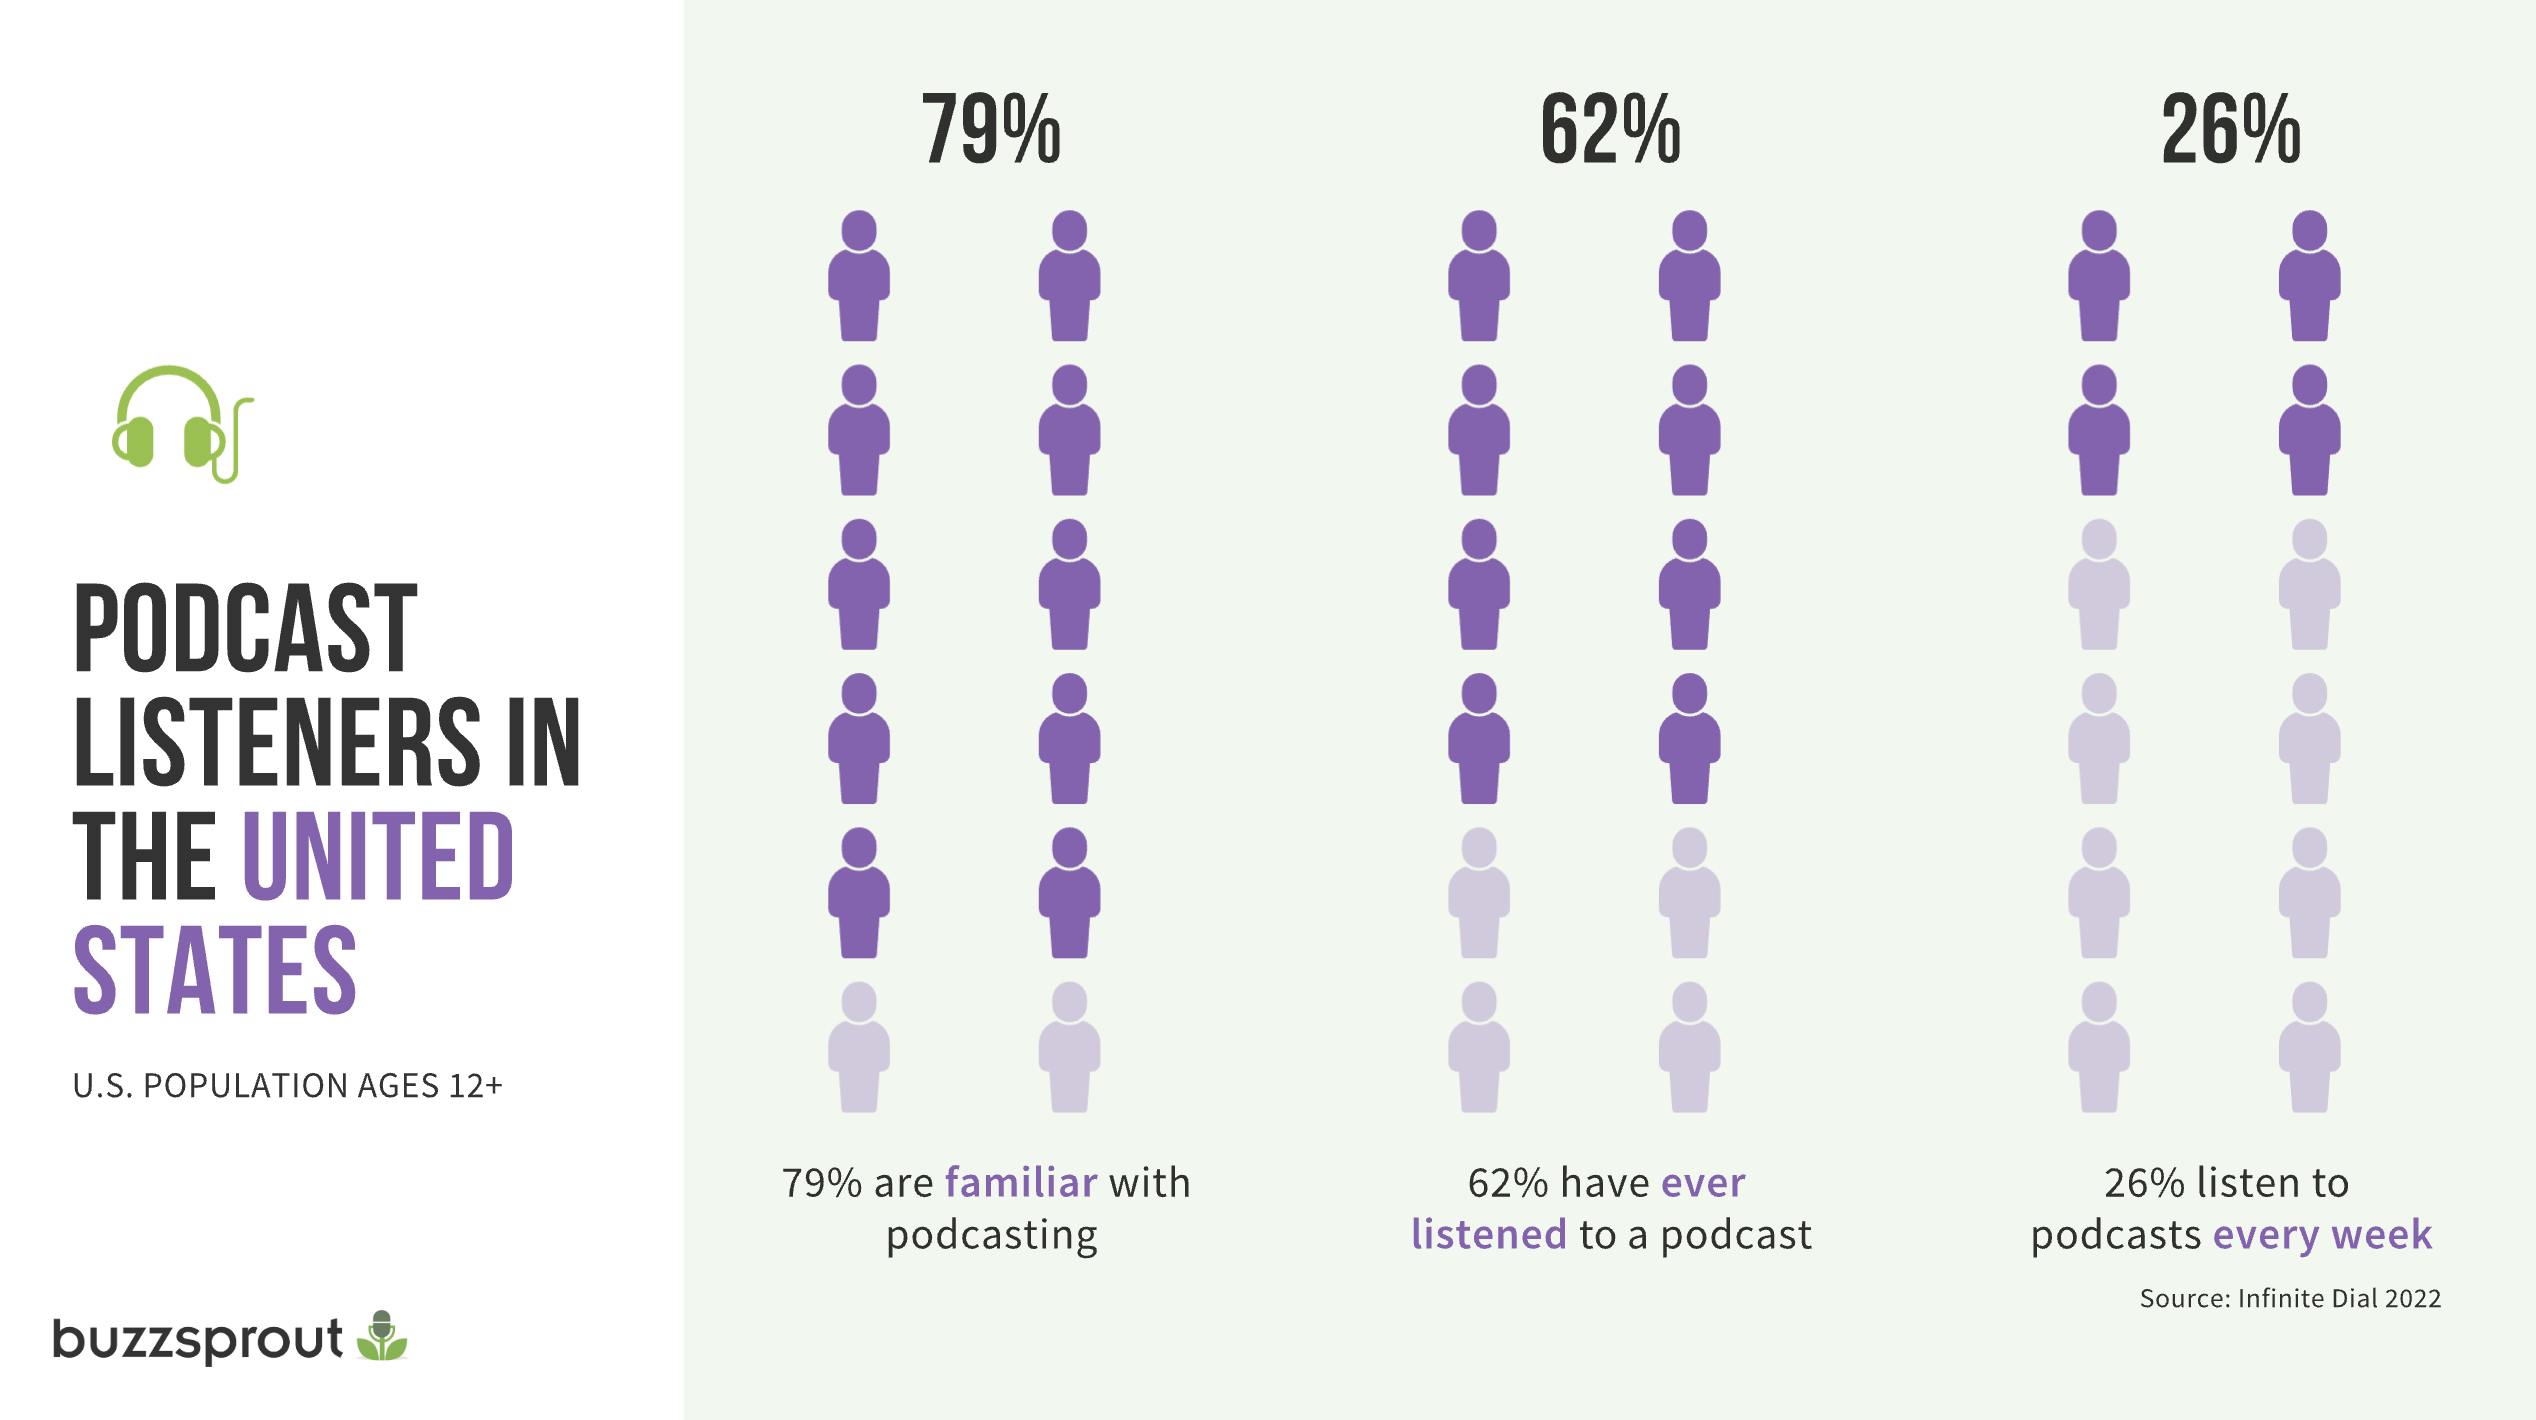 Podcast Listenership in the United States